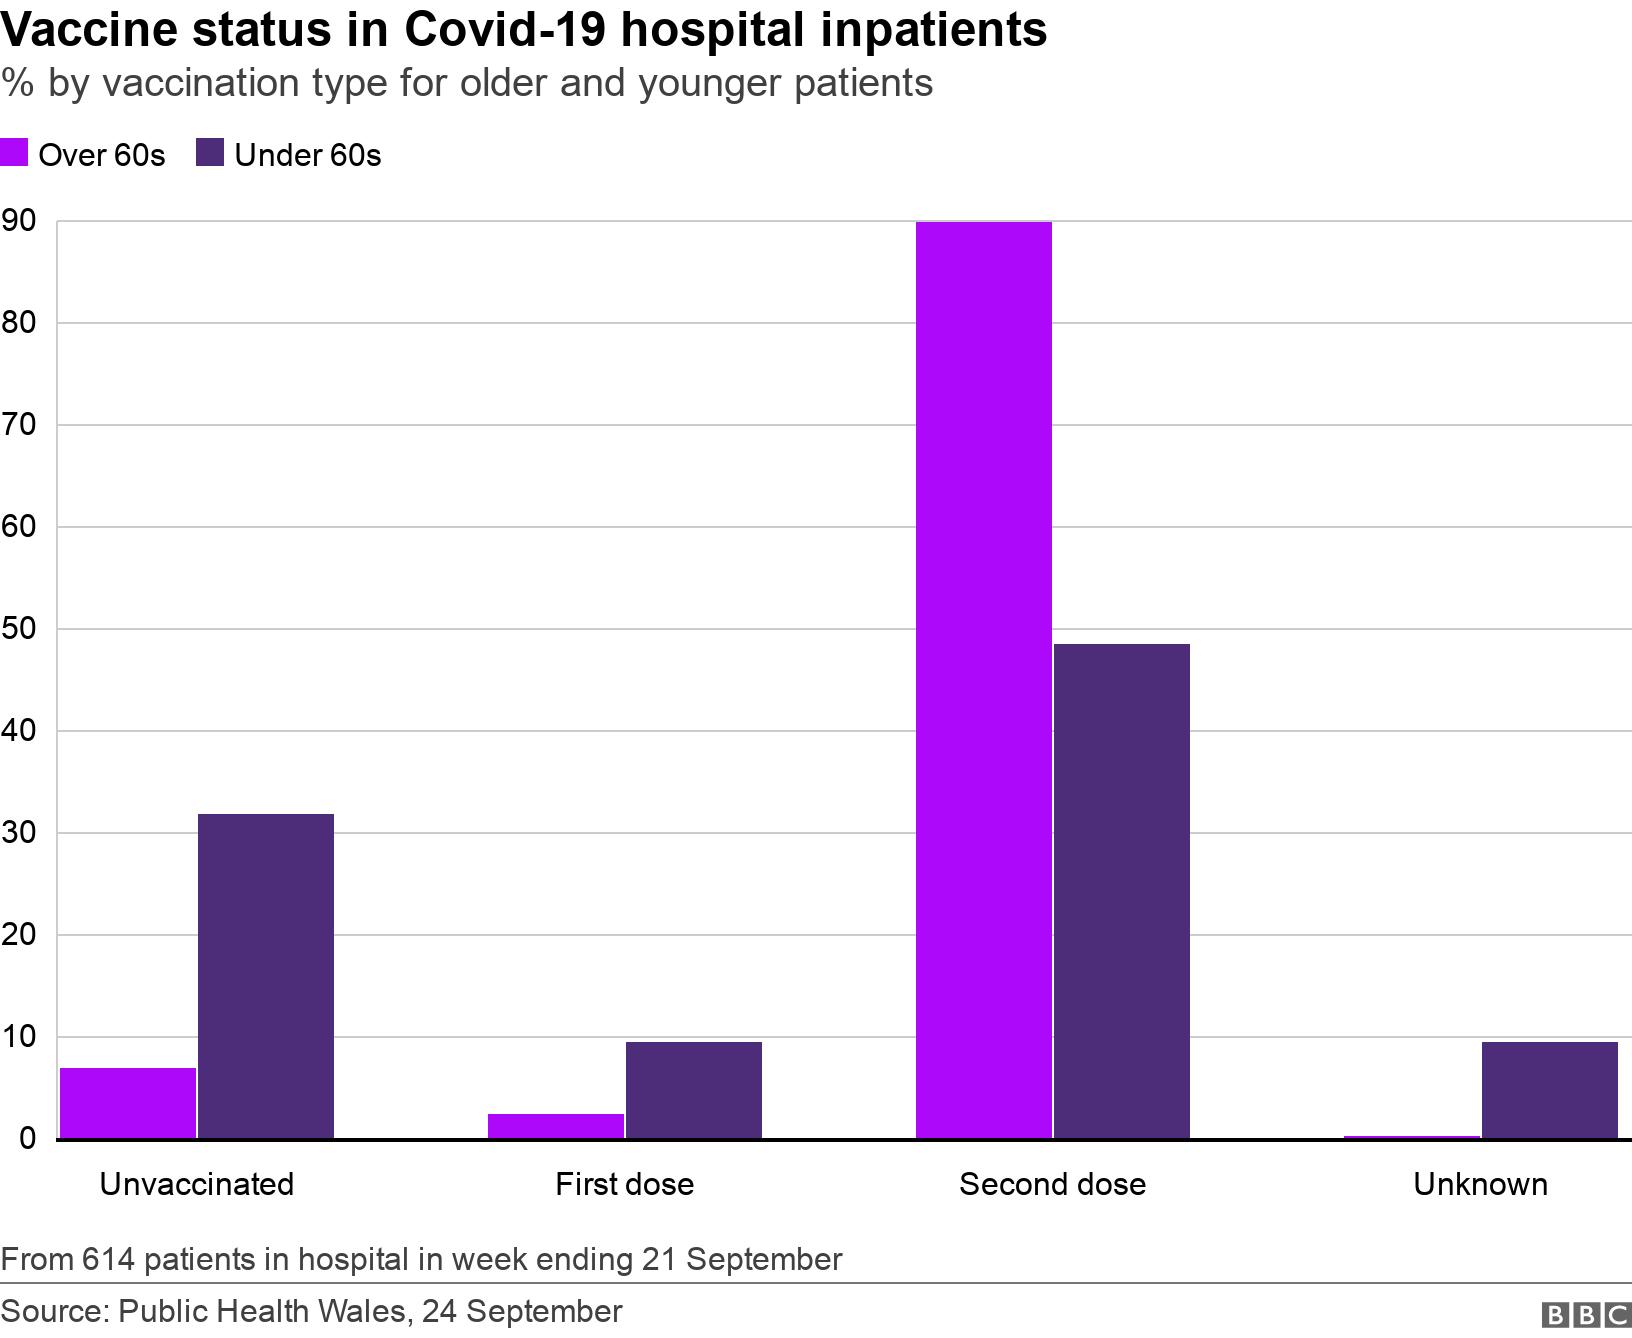  Vaccine status in Covid-19 hospital inpatients. % by vaccination type for older and younger patients.  From 614 patients in hospital in week ending 21 September.